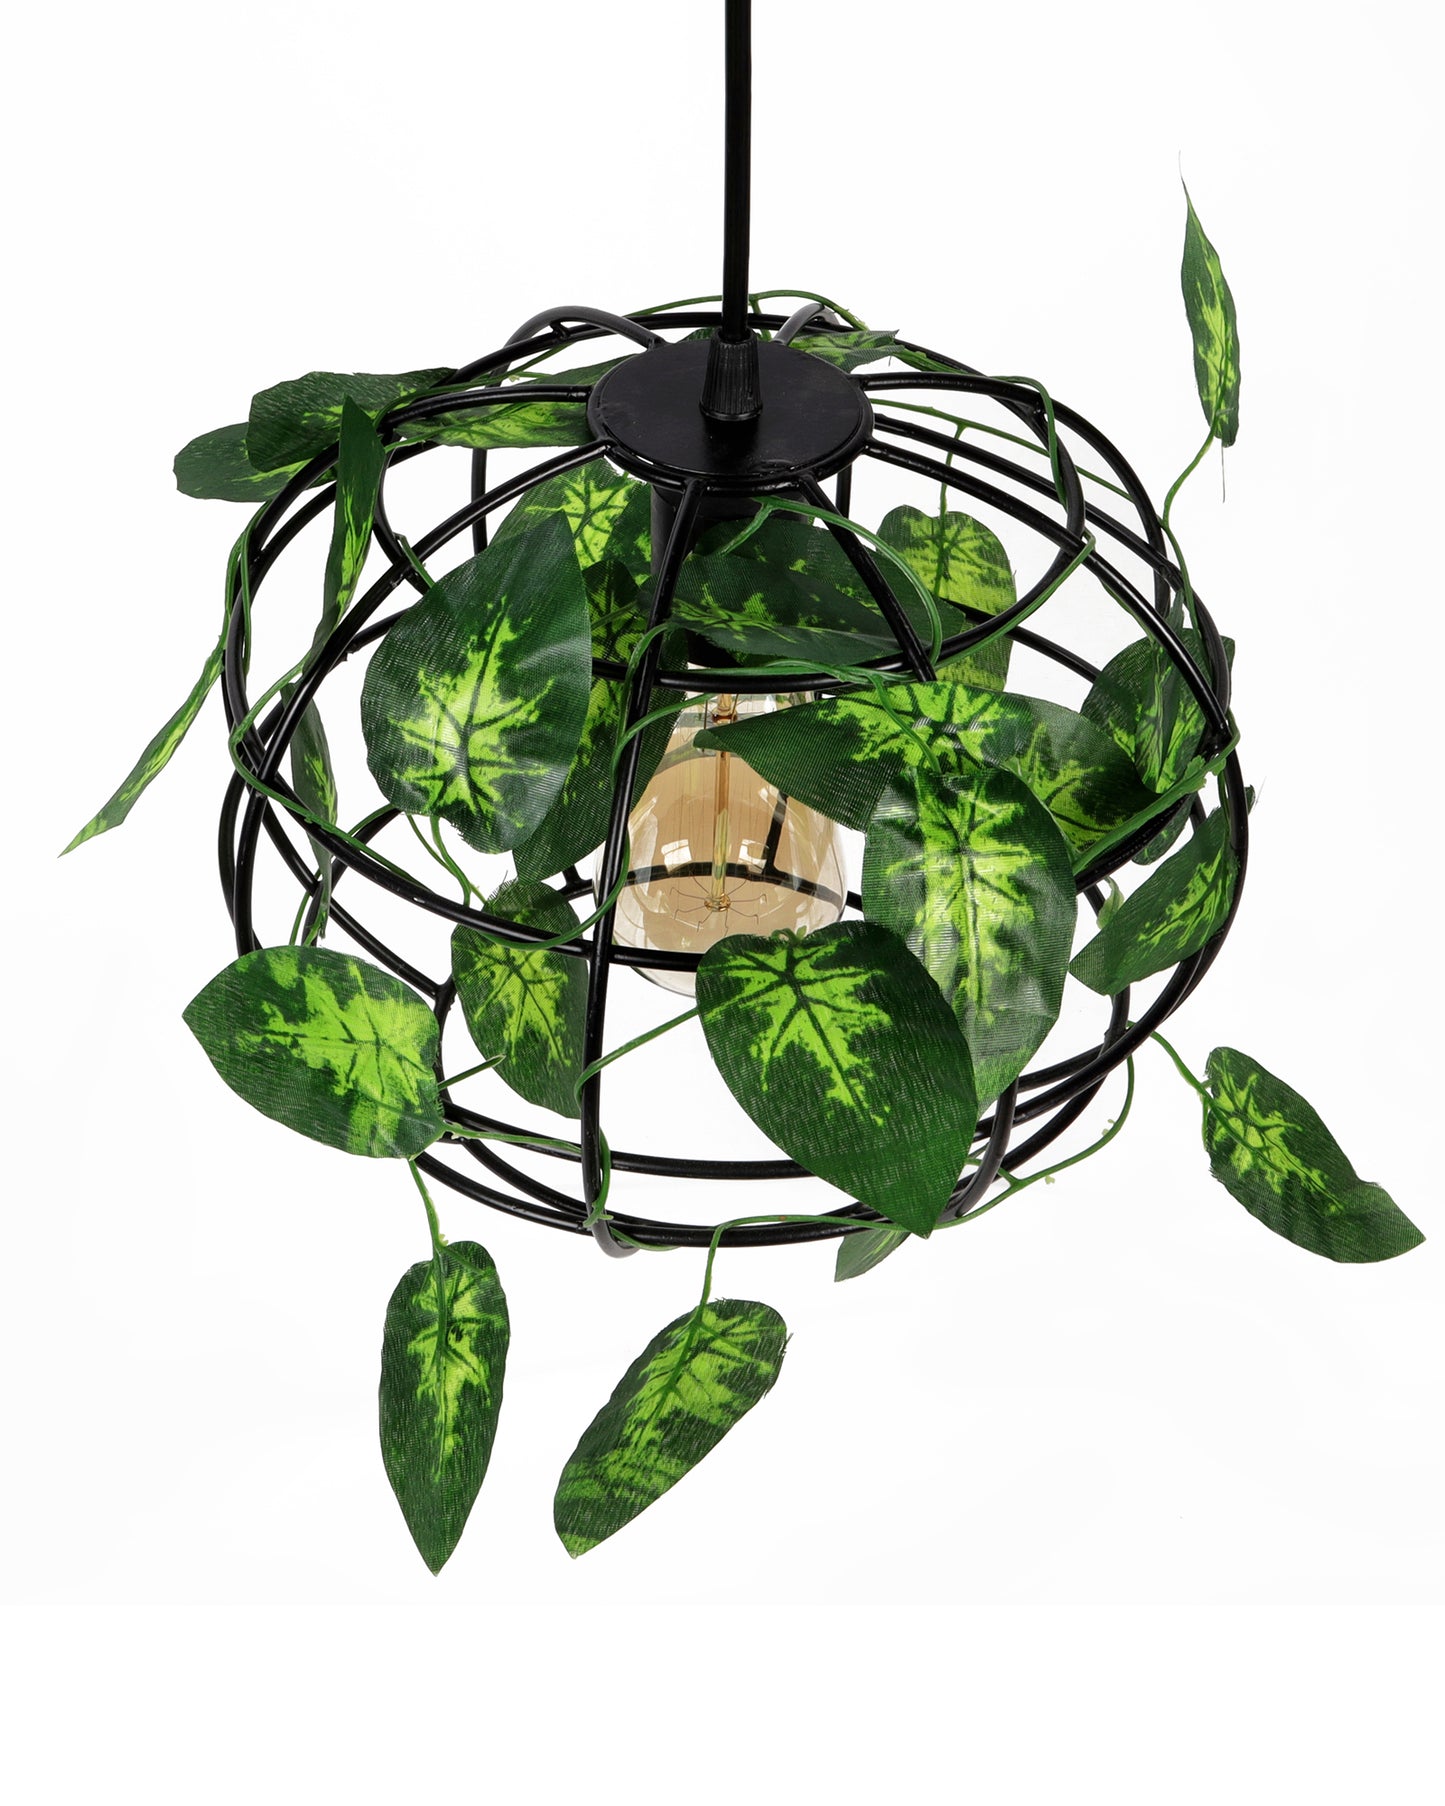 Hanging Pendant Plant Light Fixtures Creative Home Decor Living Room Dining, Ceiling light with leafy vine and filament bulb, Sphere